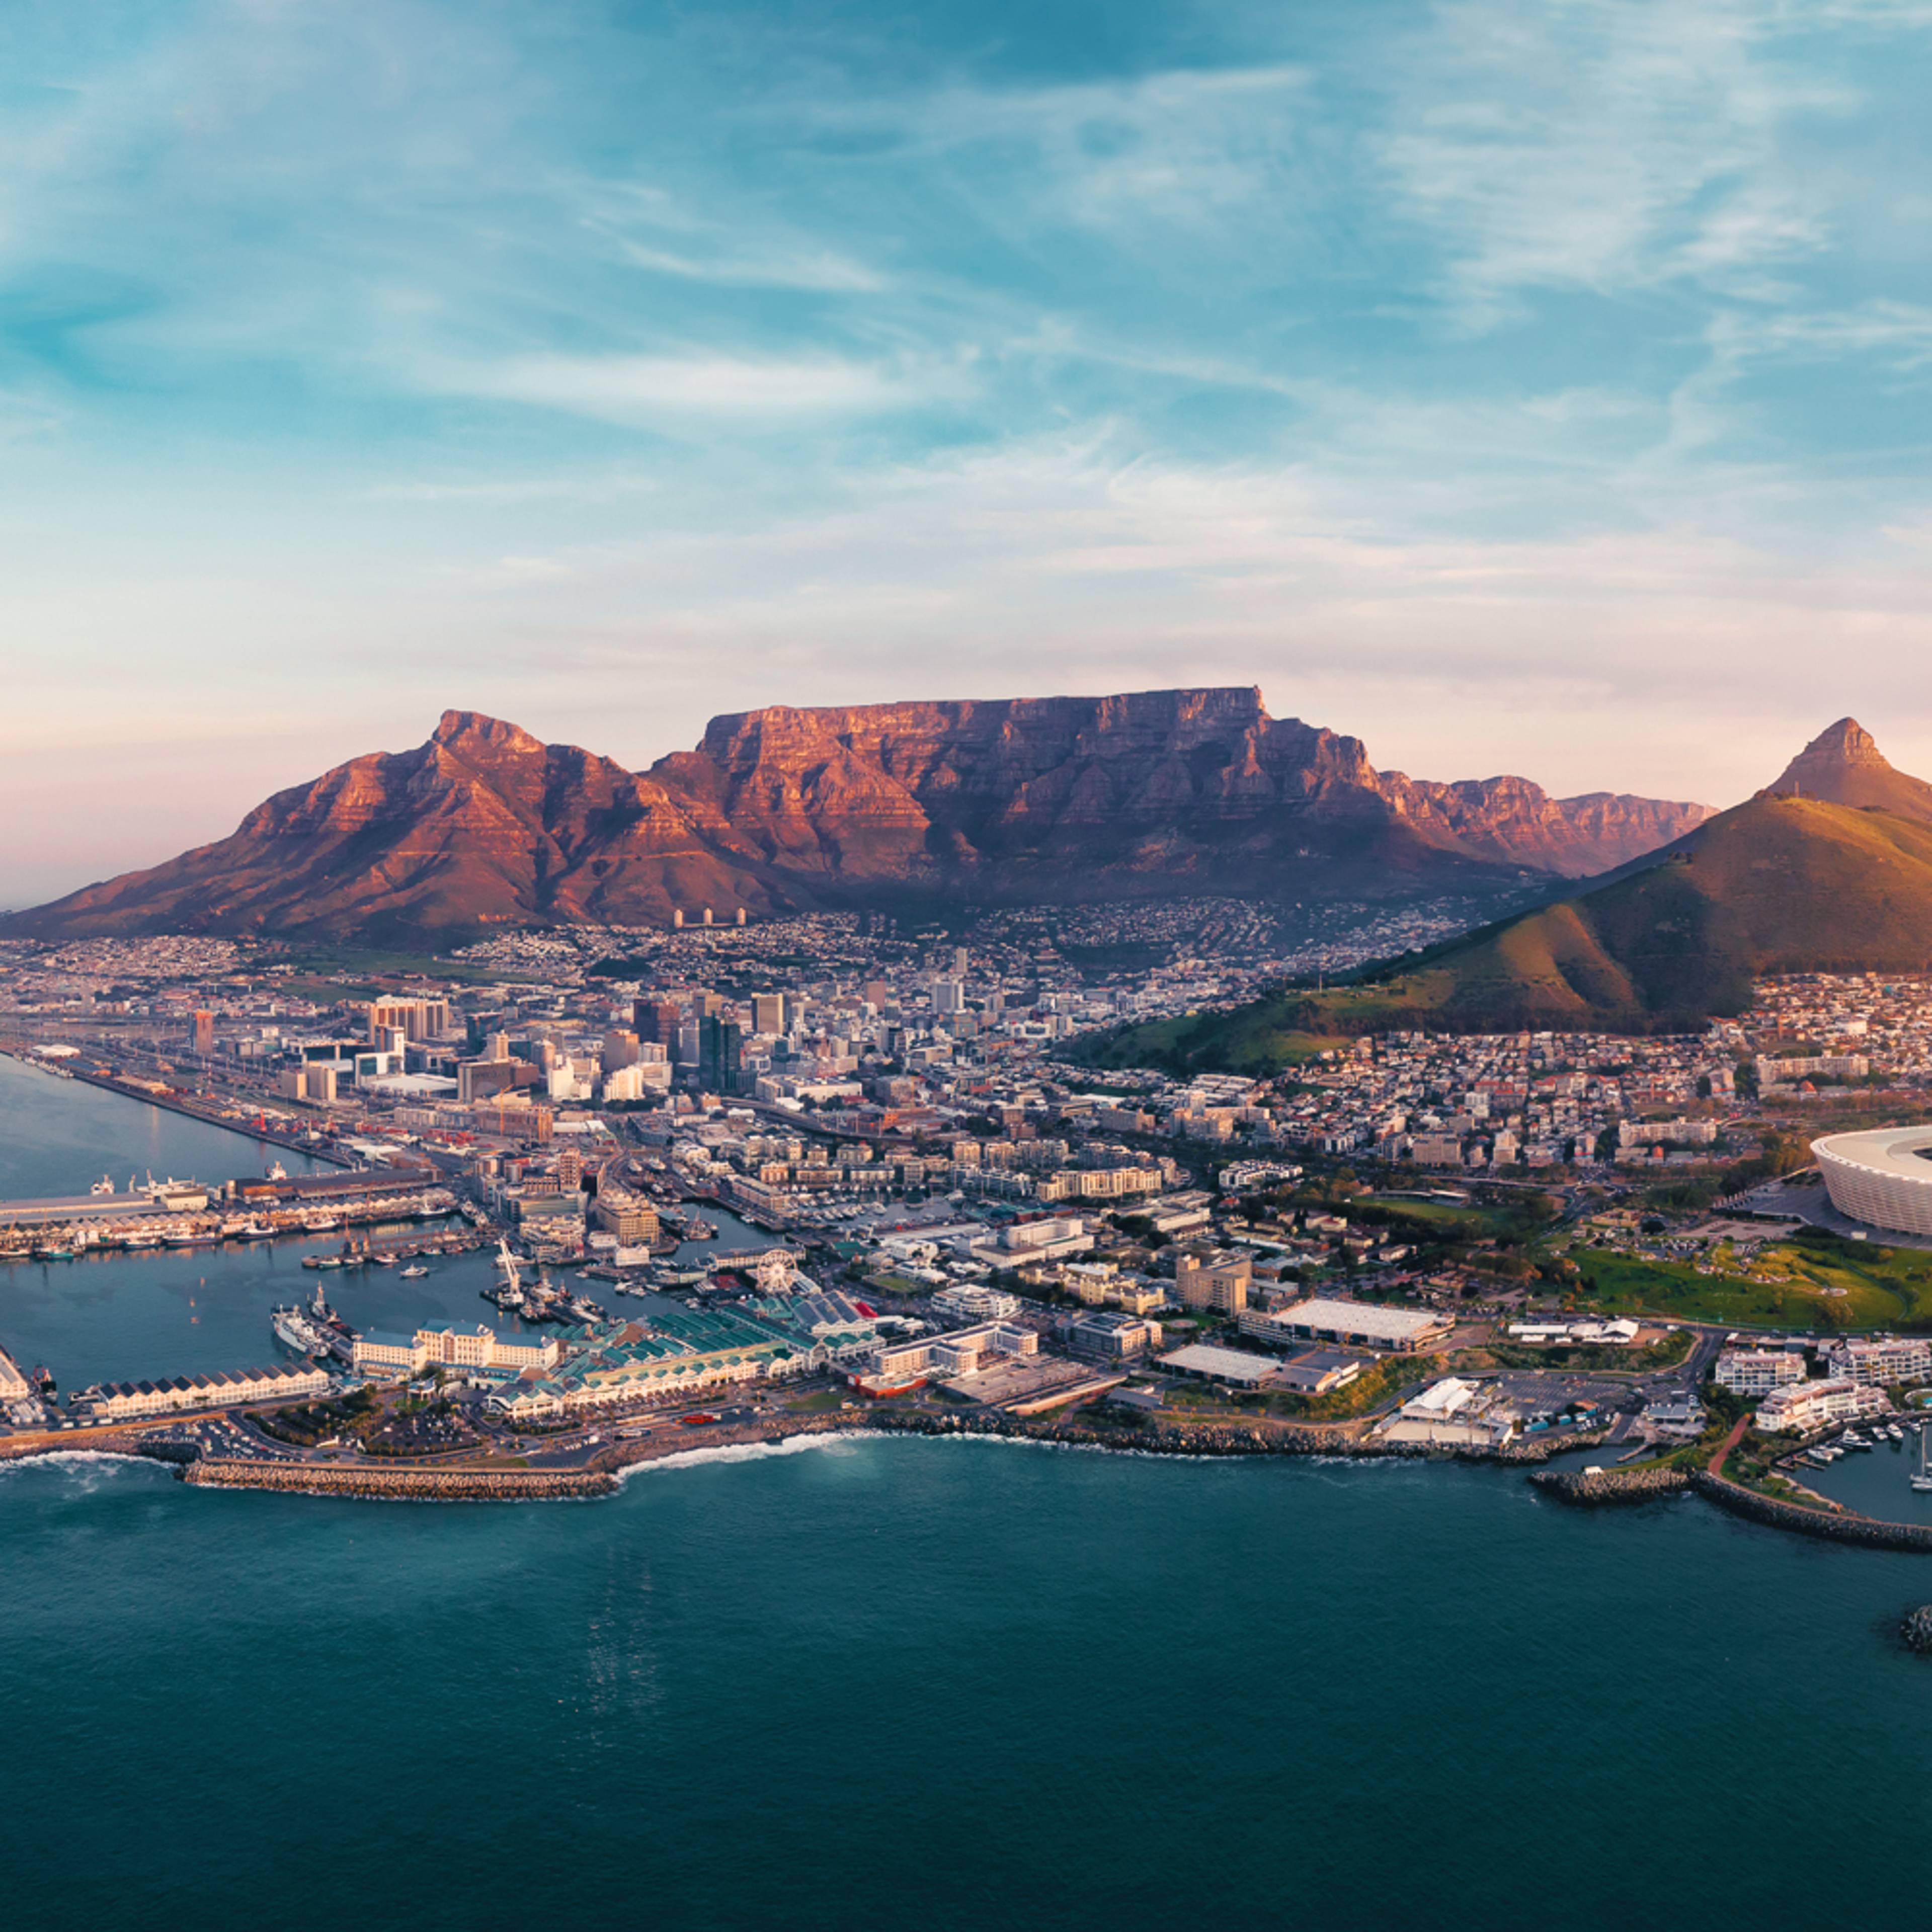 Design your perfect tour of South Africa's cities with a local expert